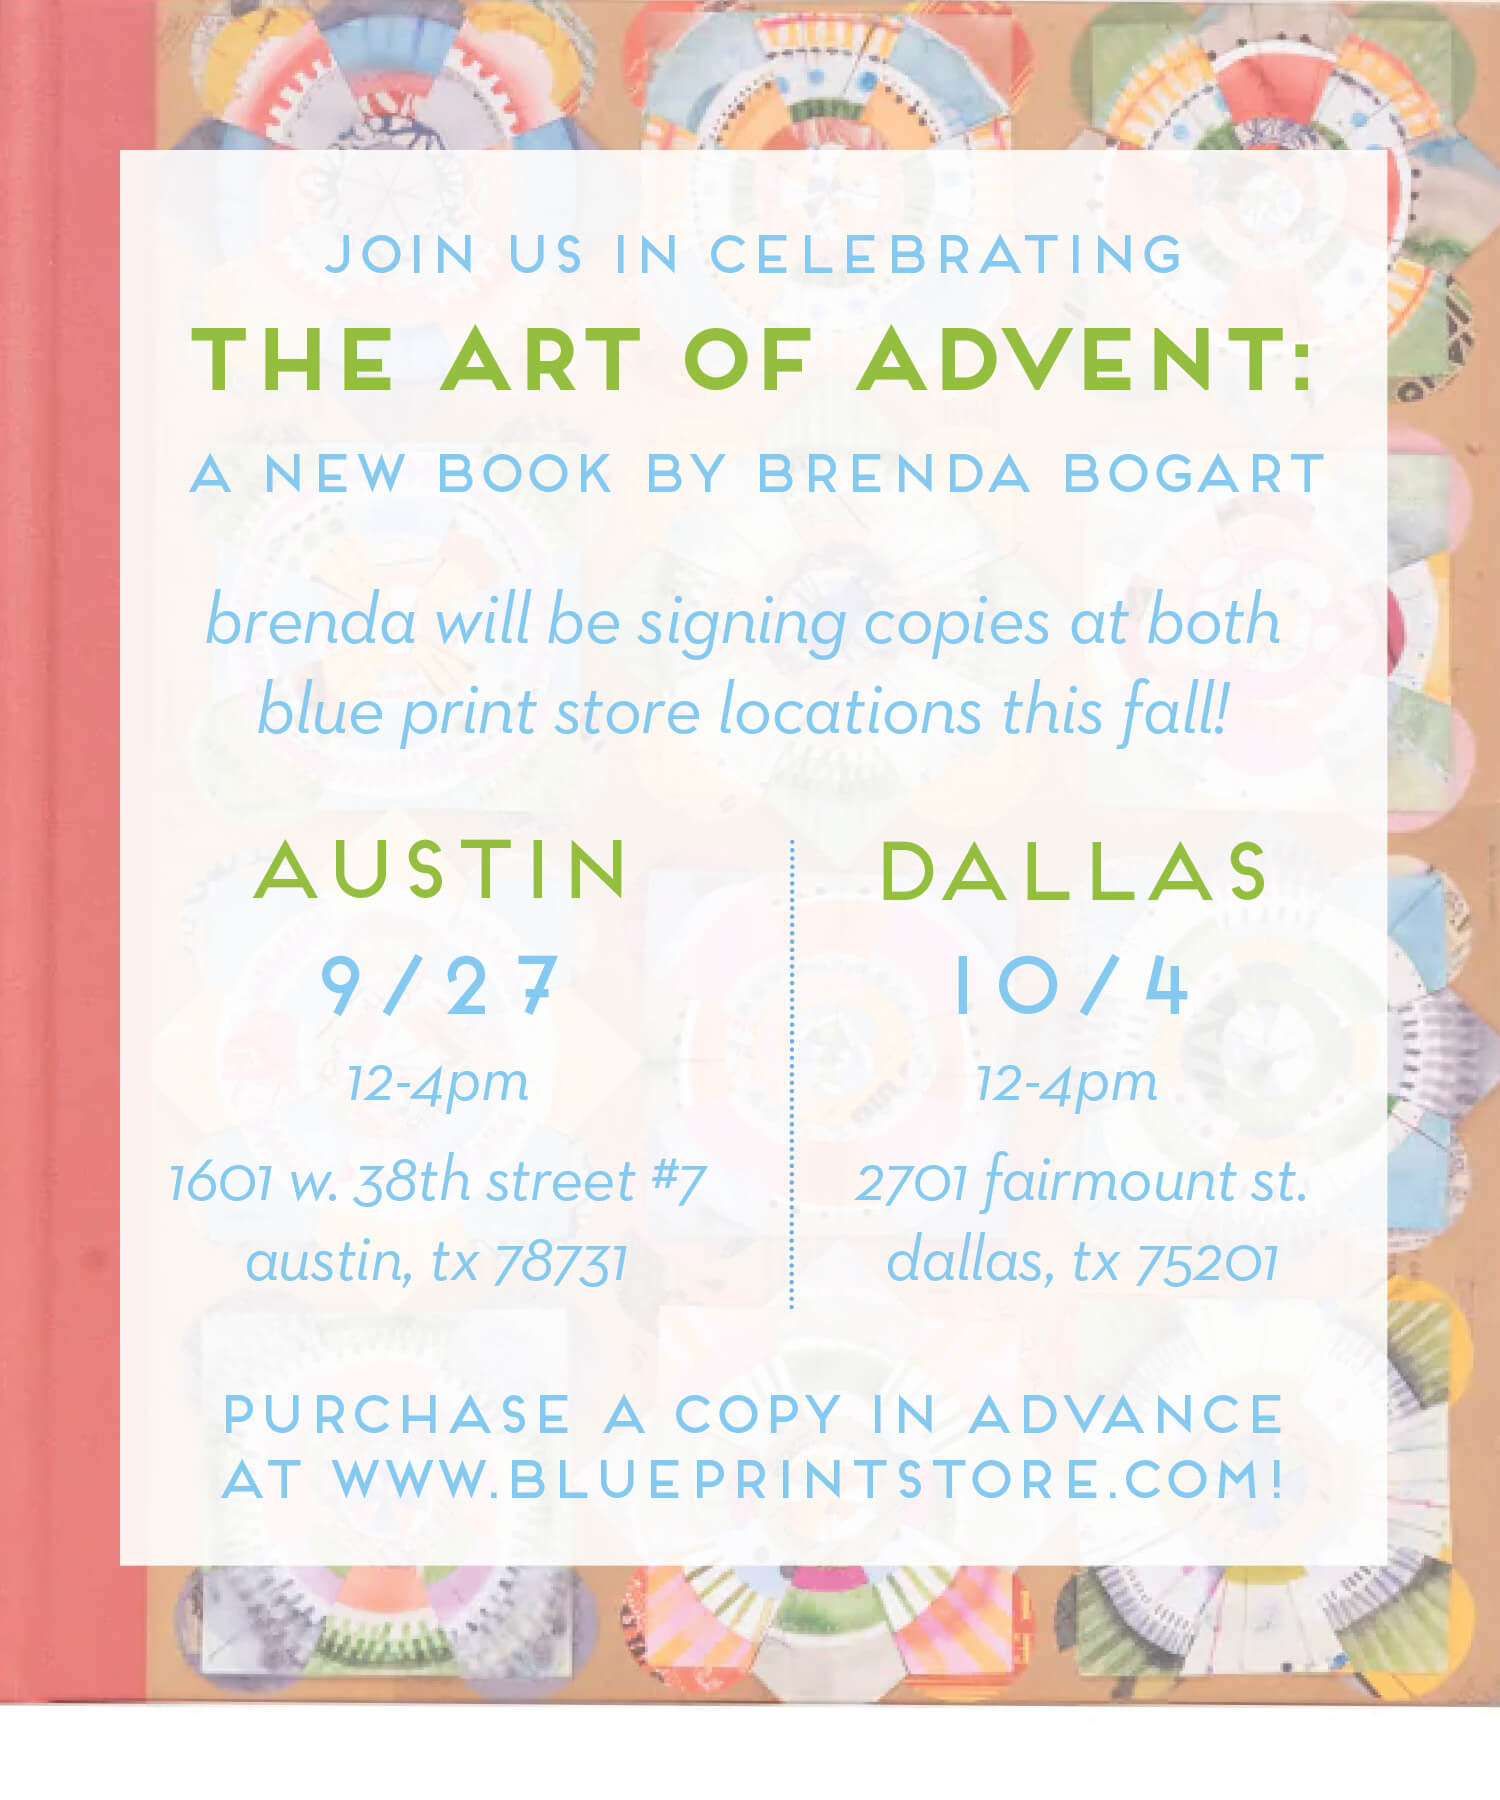 Photo for Book Signing for The Art of Advent, Brenda Bogart post